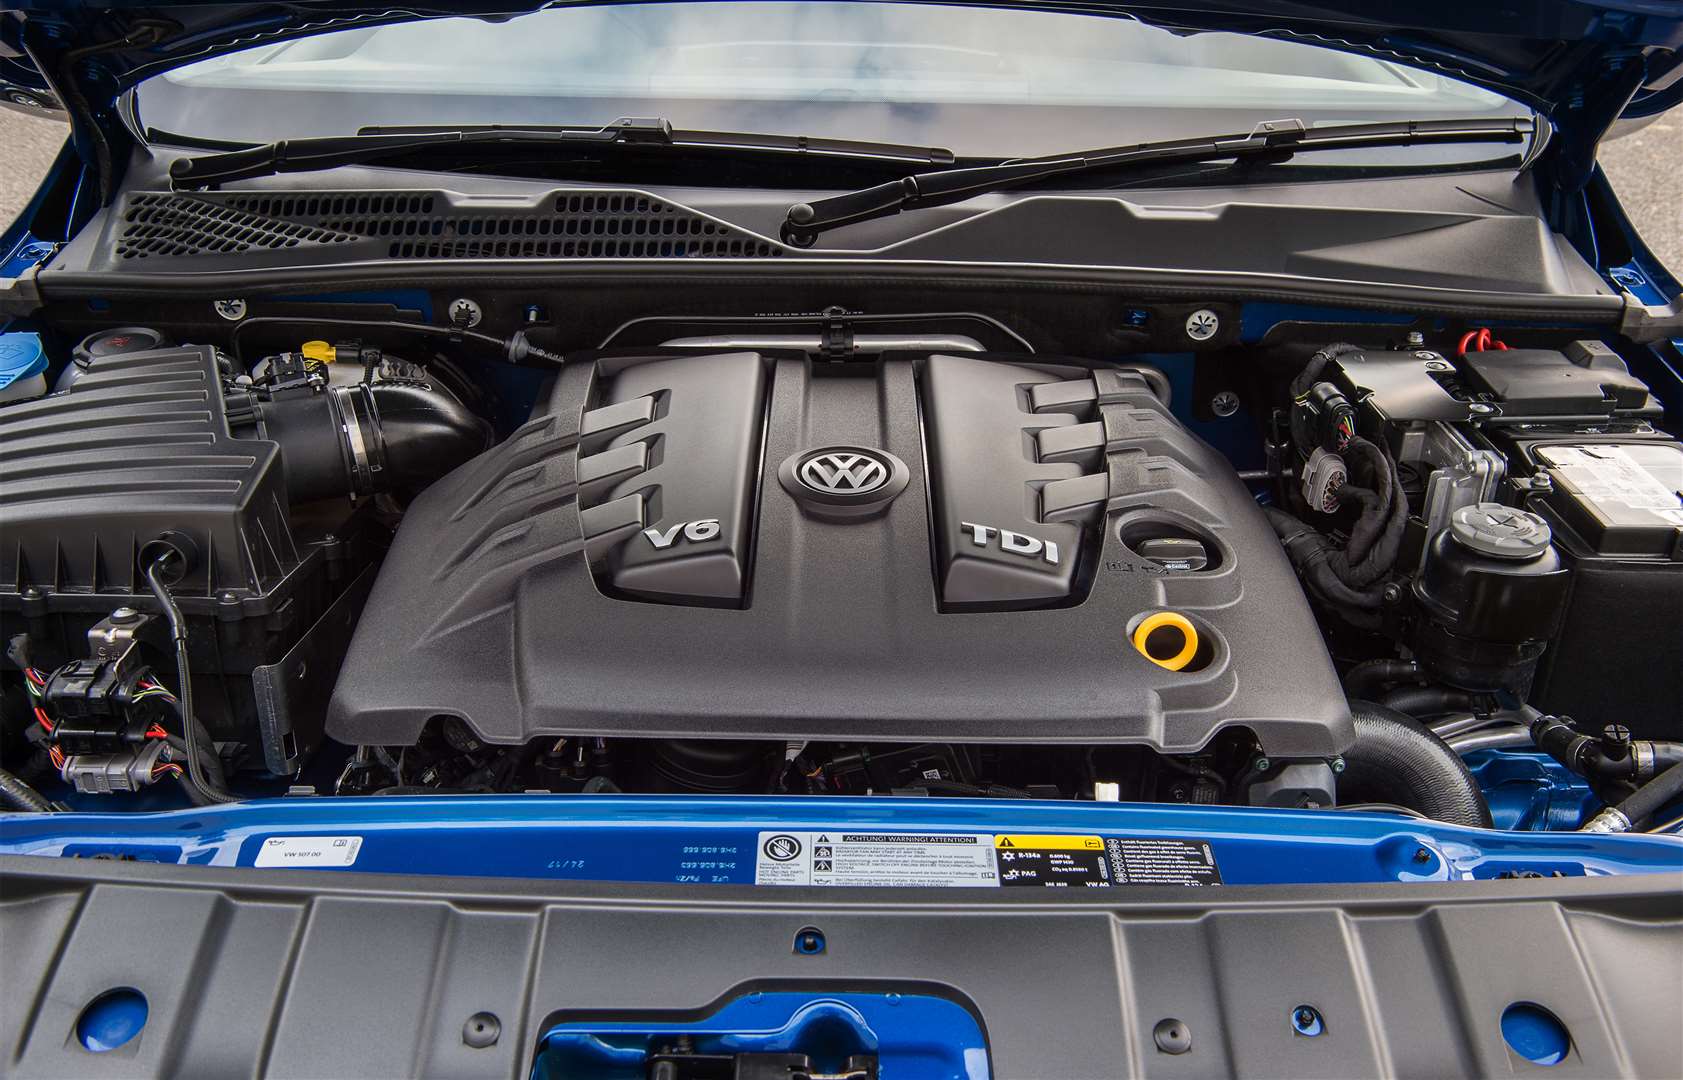 The 3.0-litre V6 TDI replaces existing 2.0-litre engine, offers up to 224 PS and 550 Nm (1292334)